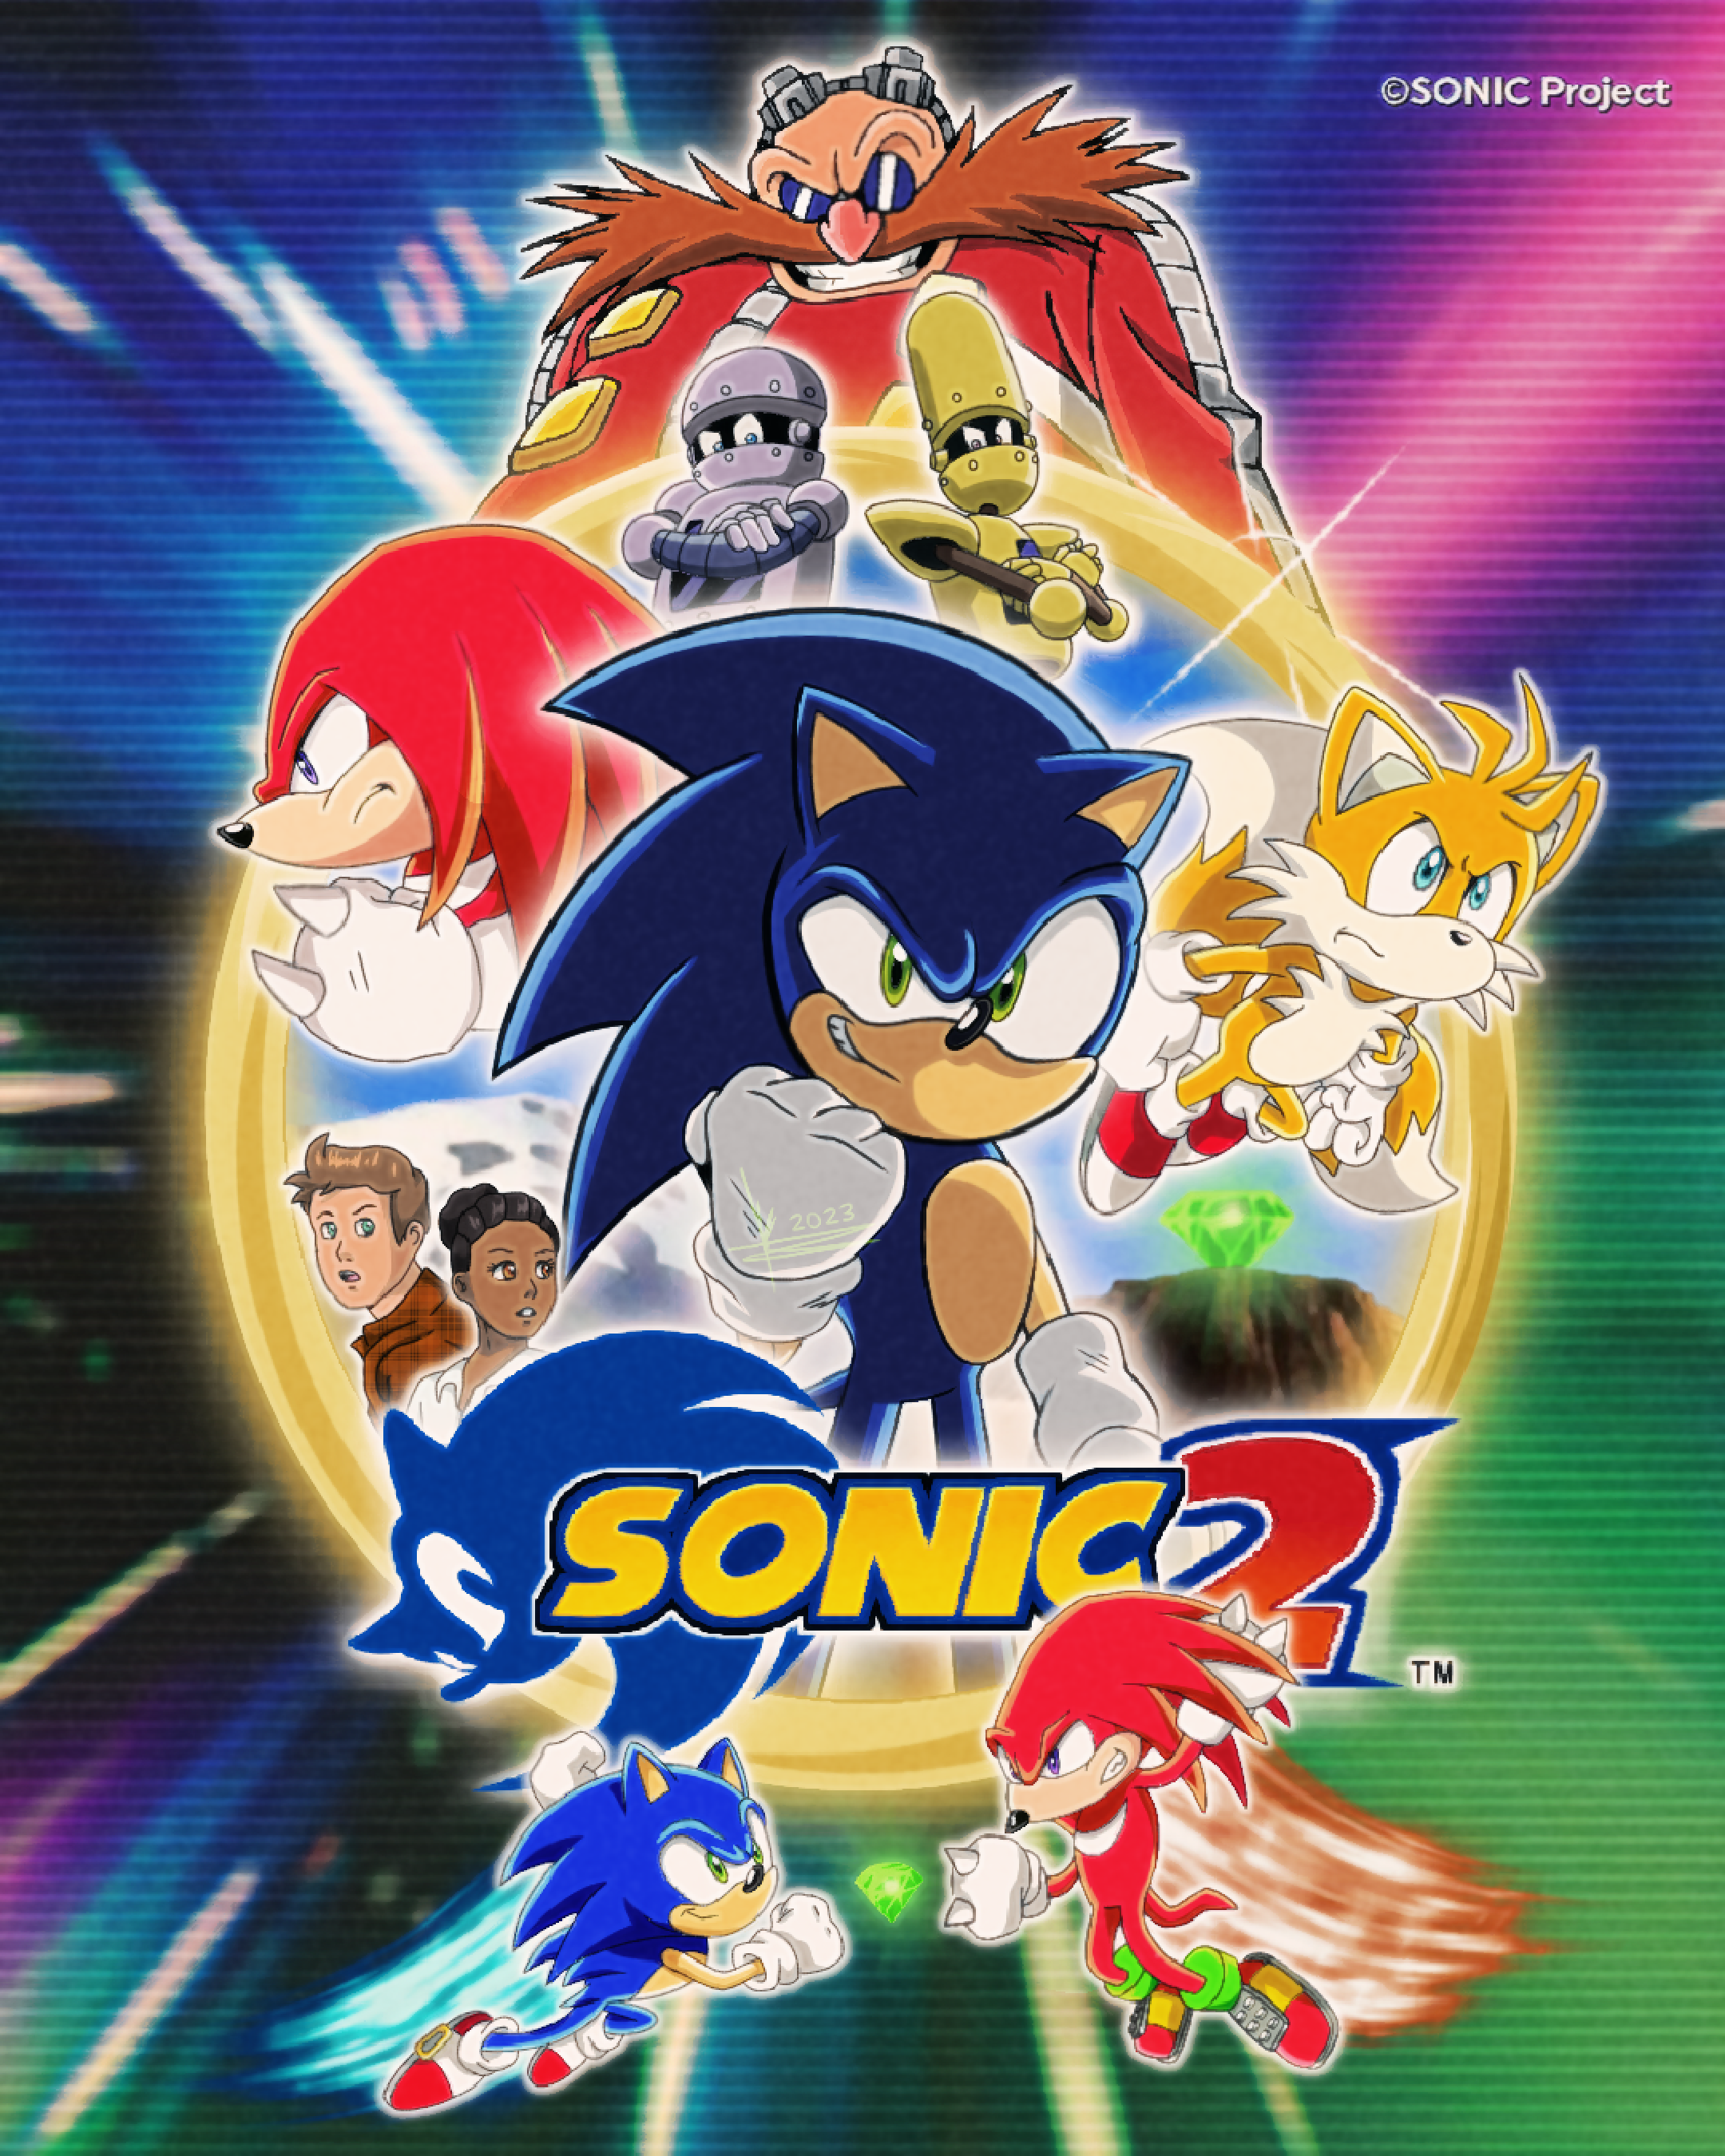 Sonic 2 Movie poster line art from Mar 31, 2022 by lANGXl on DeviantArt